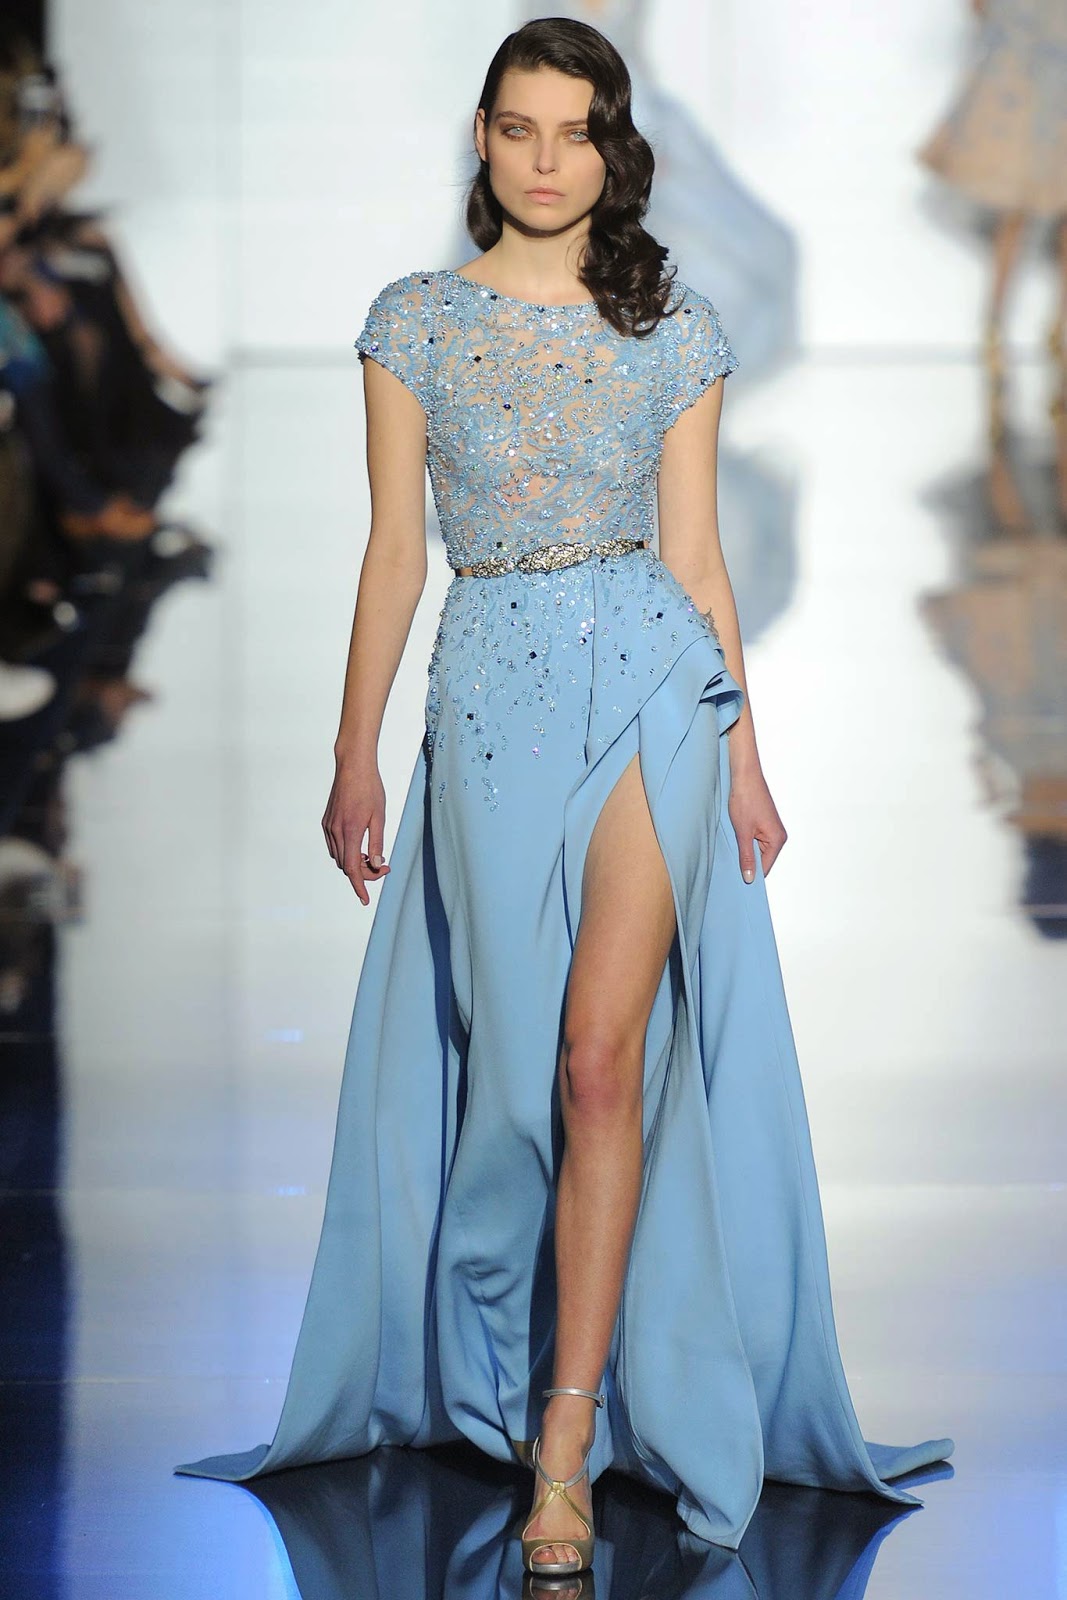 Serendipitylands: ZUHAIR MURAD COLLECTION COUTURE SPRING 2015